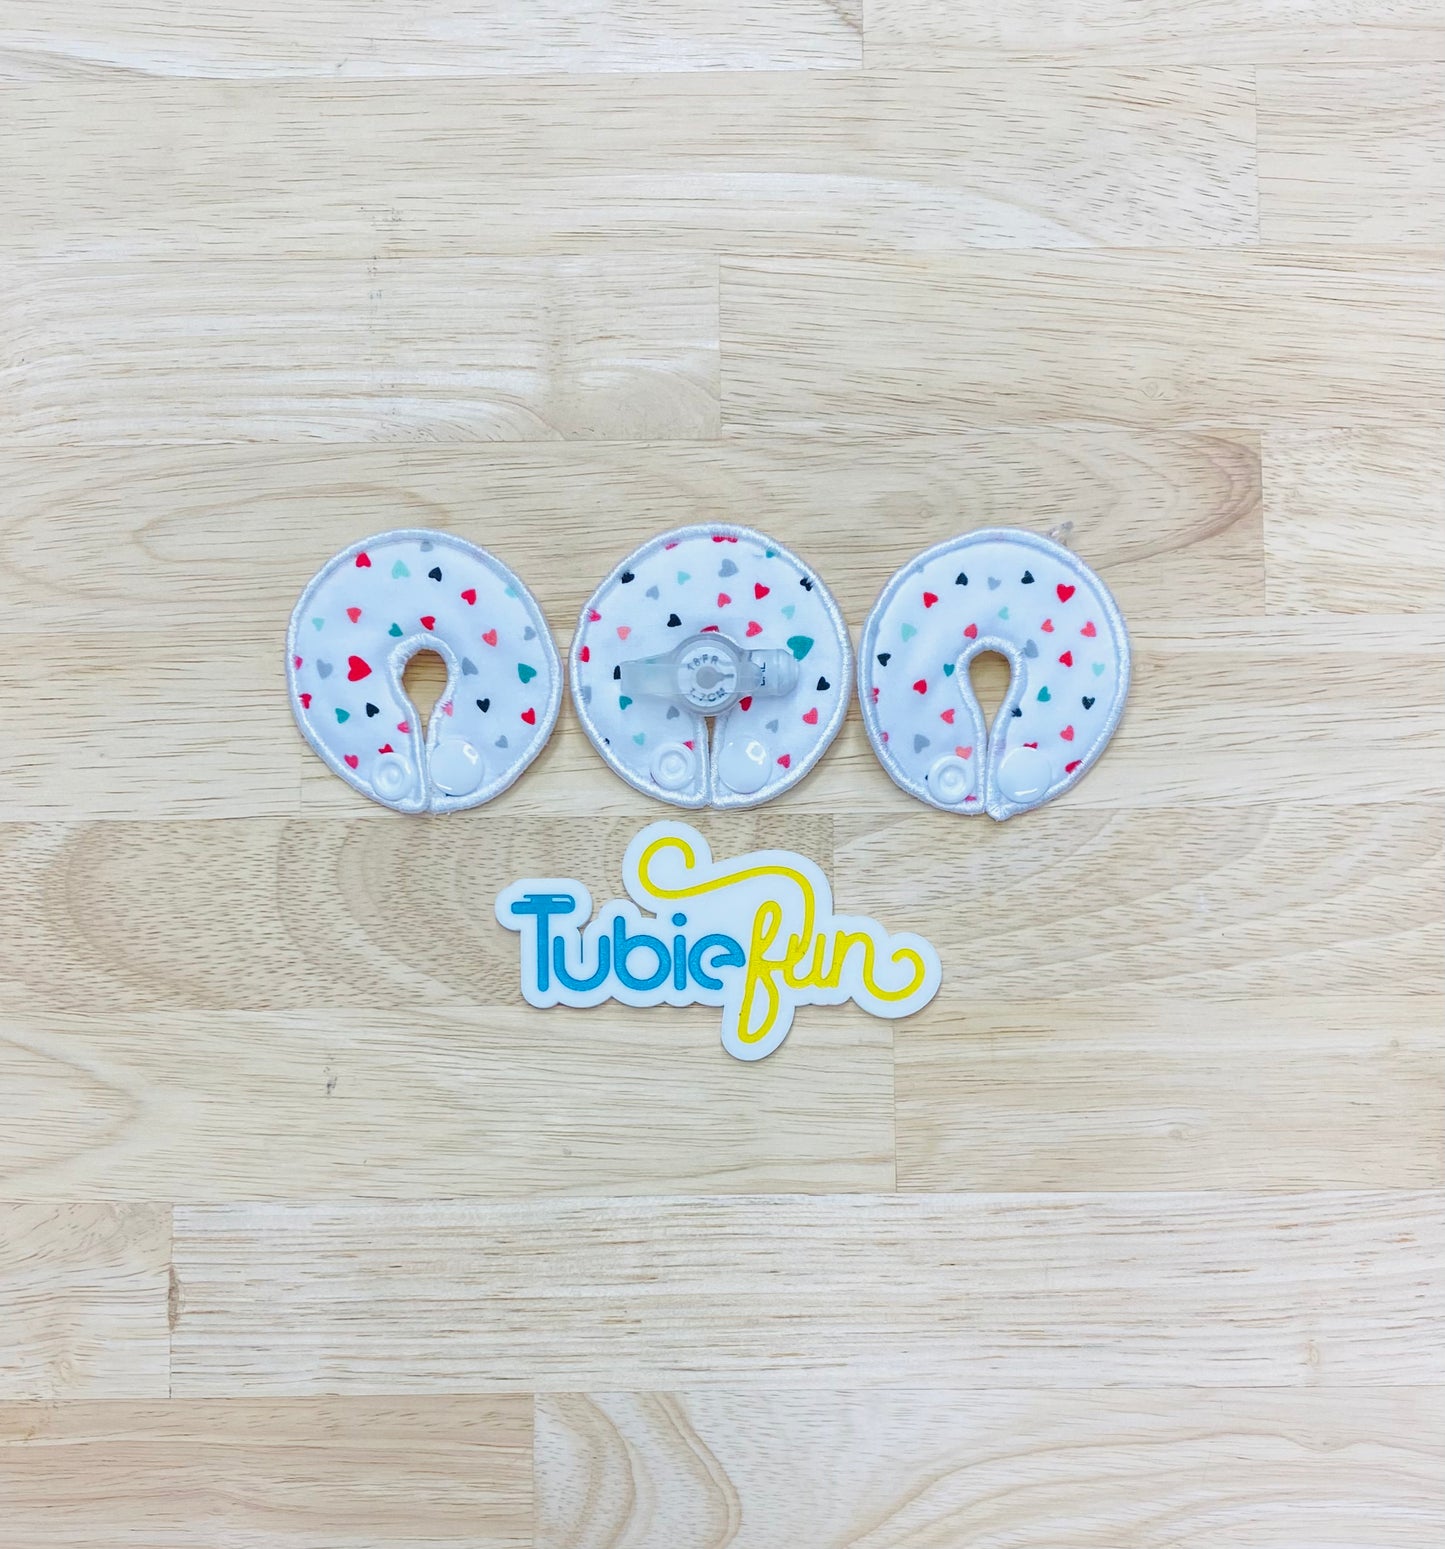 G-Tube Button Pad Cover - Coloured Hearts on White